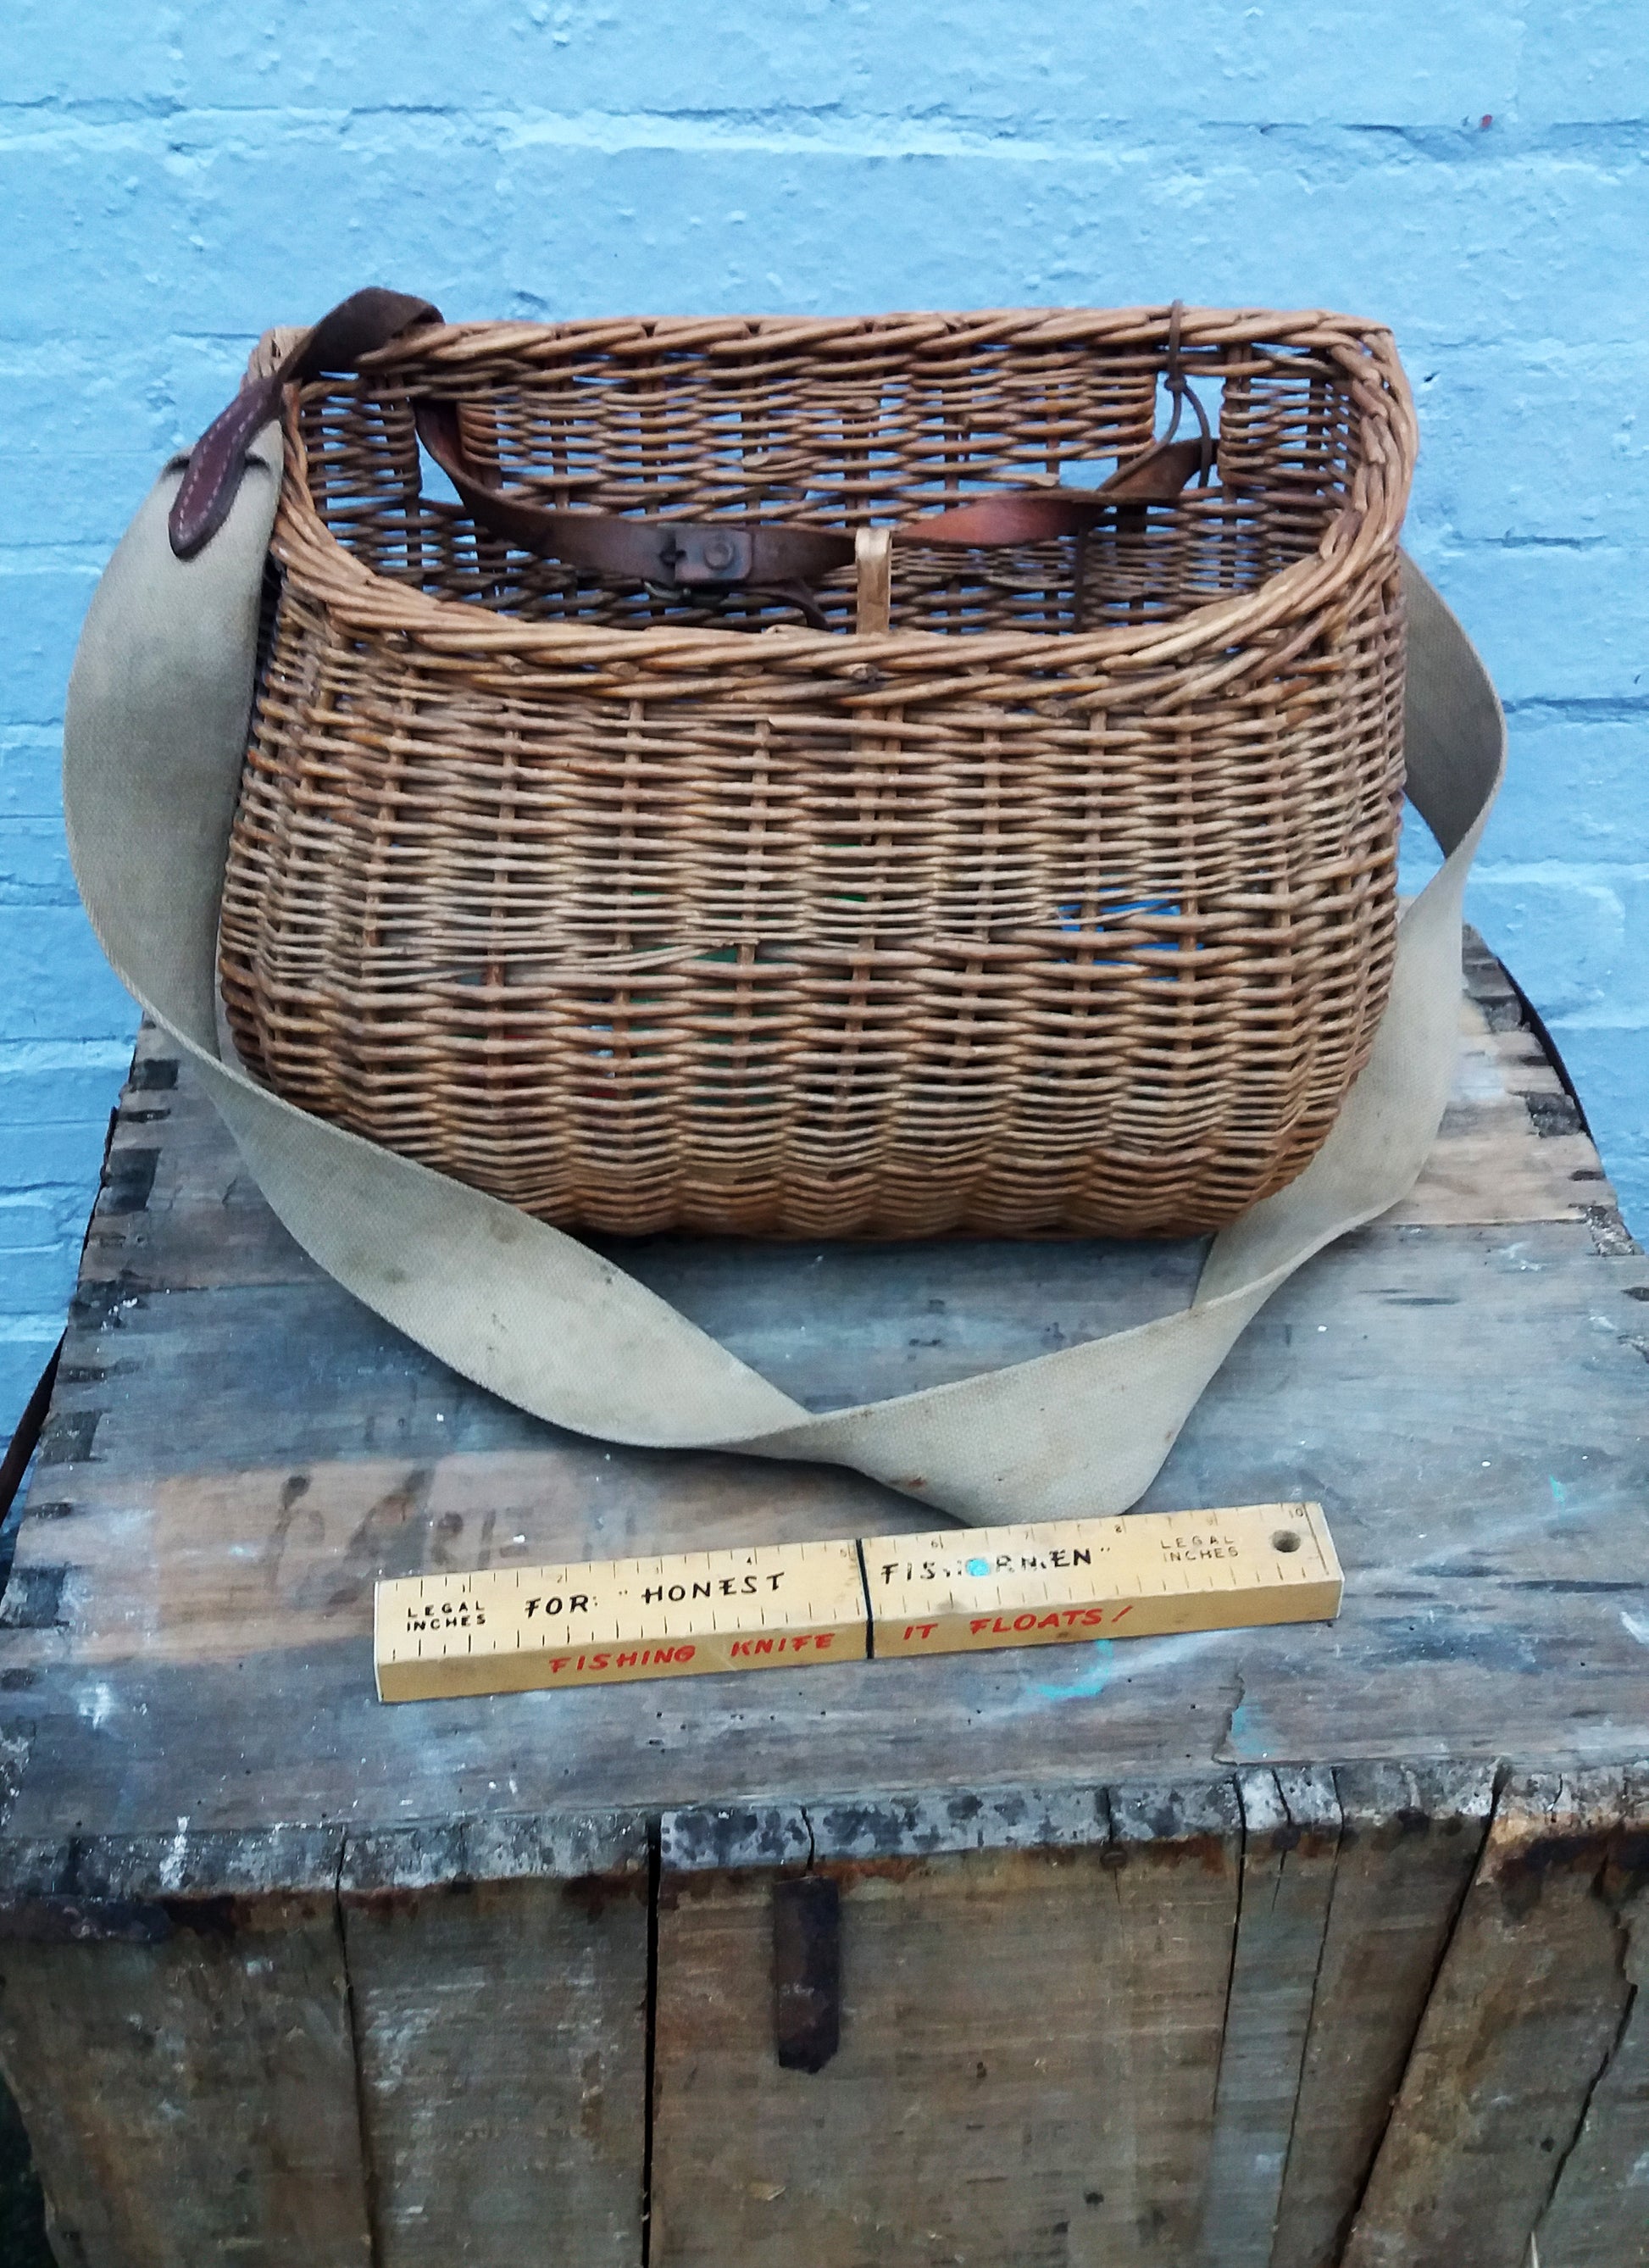 Beautiful rustic vintage wicker fisherman's basket with original strap and all its contents